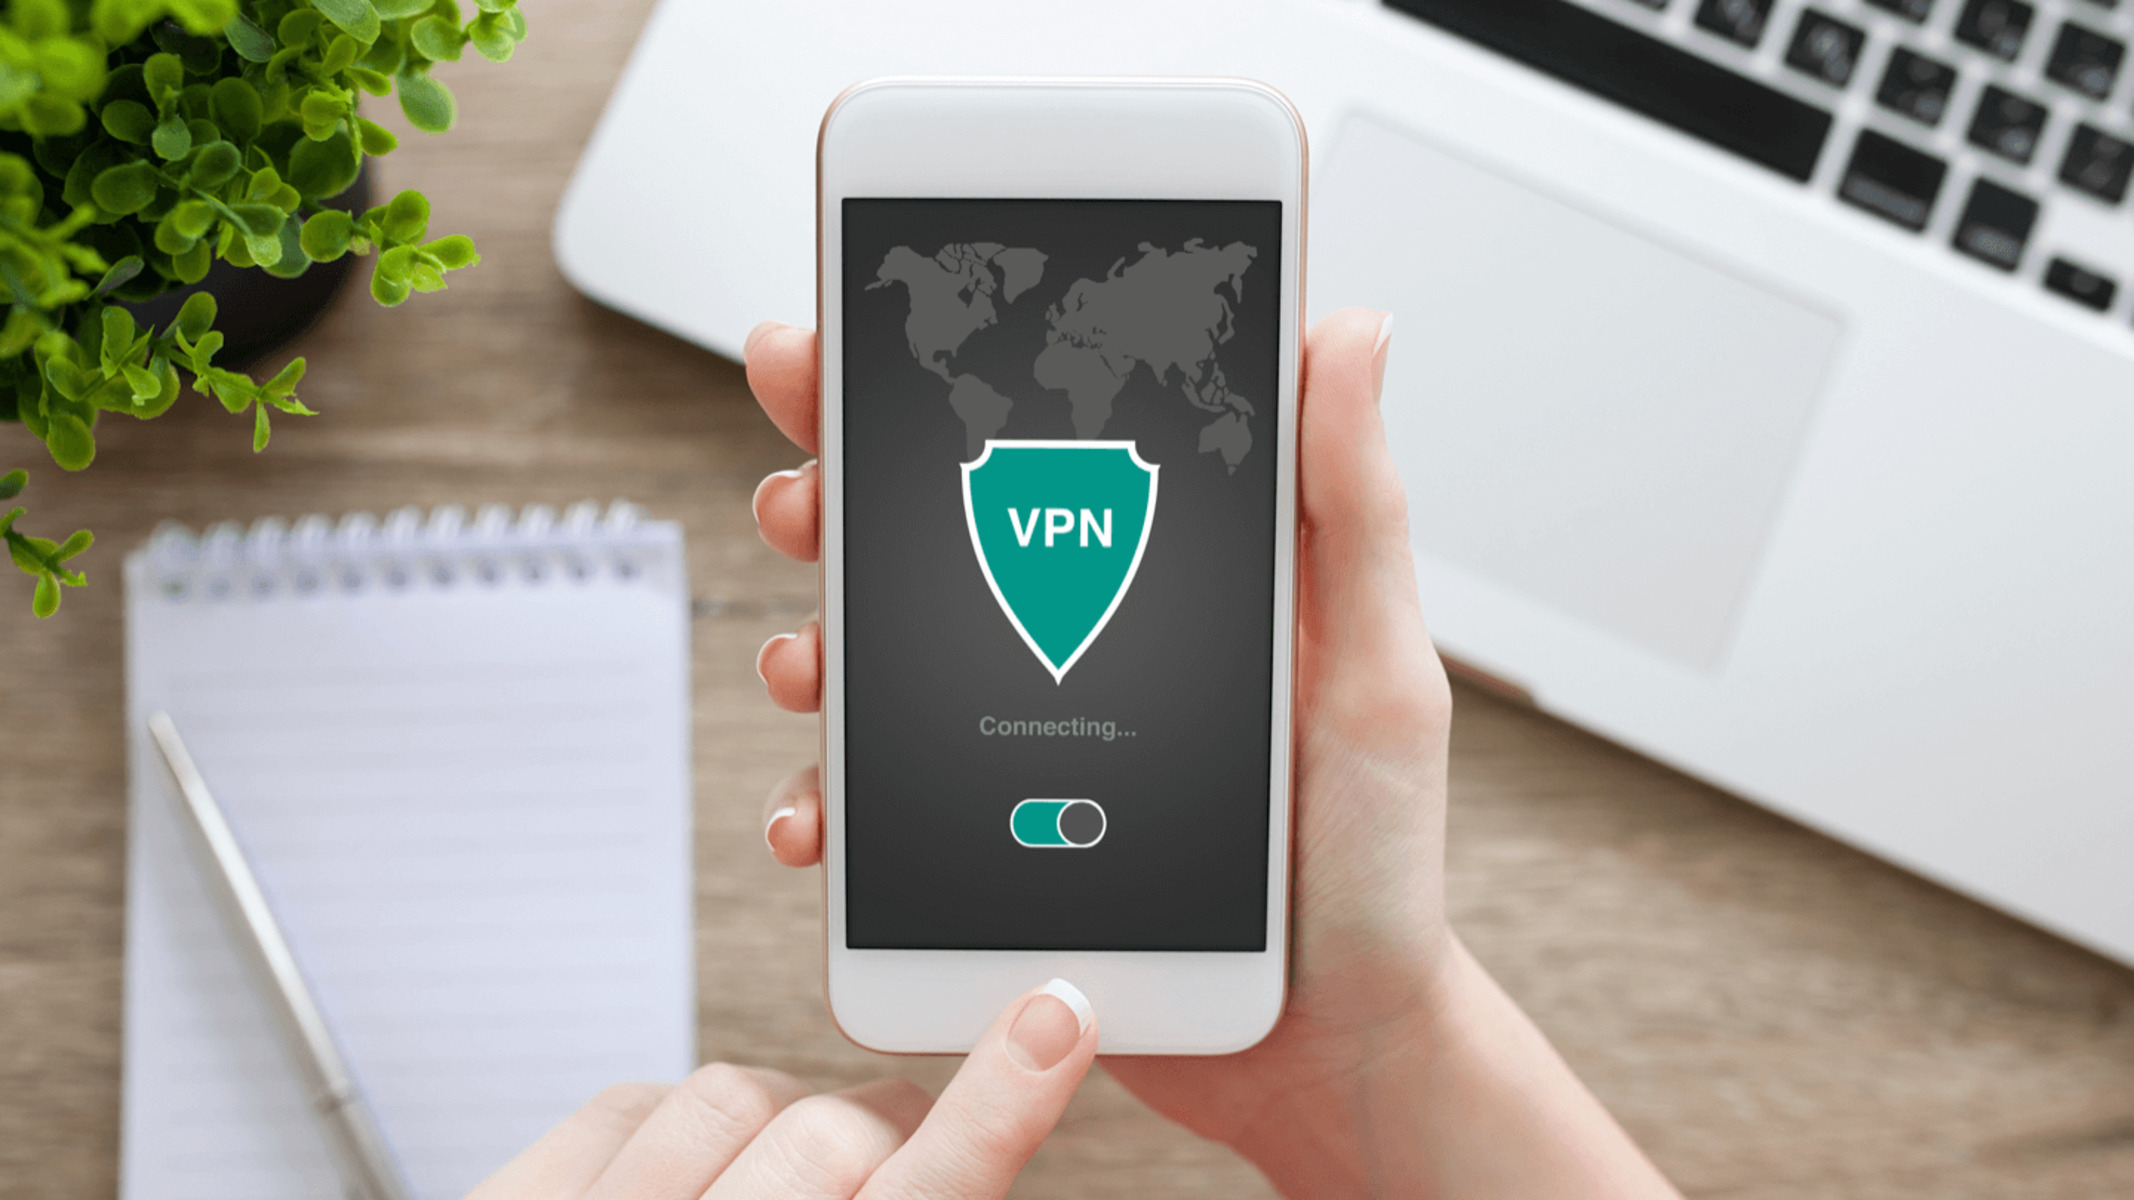 How To Connect To A VPN